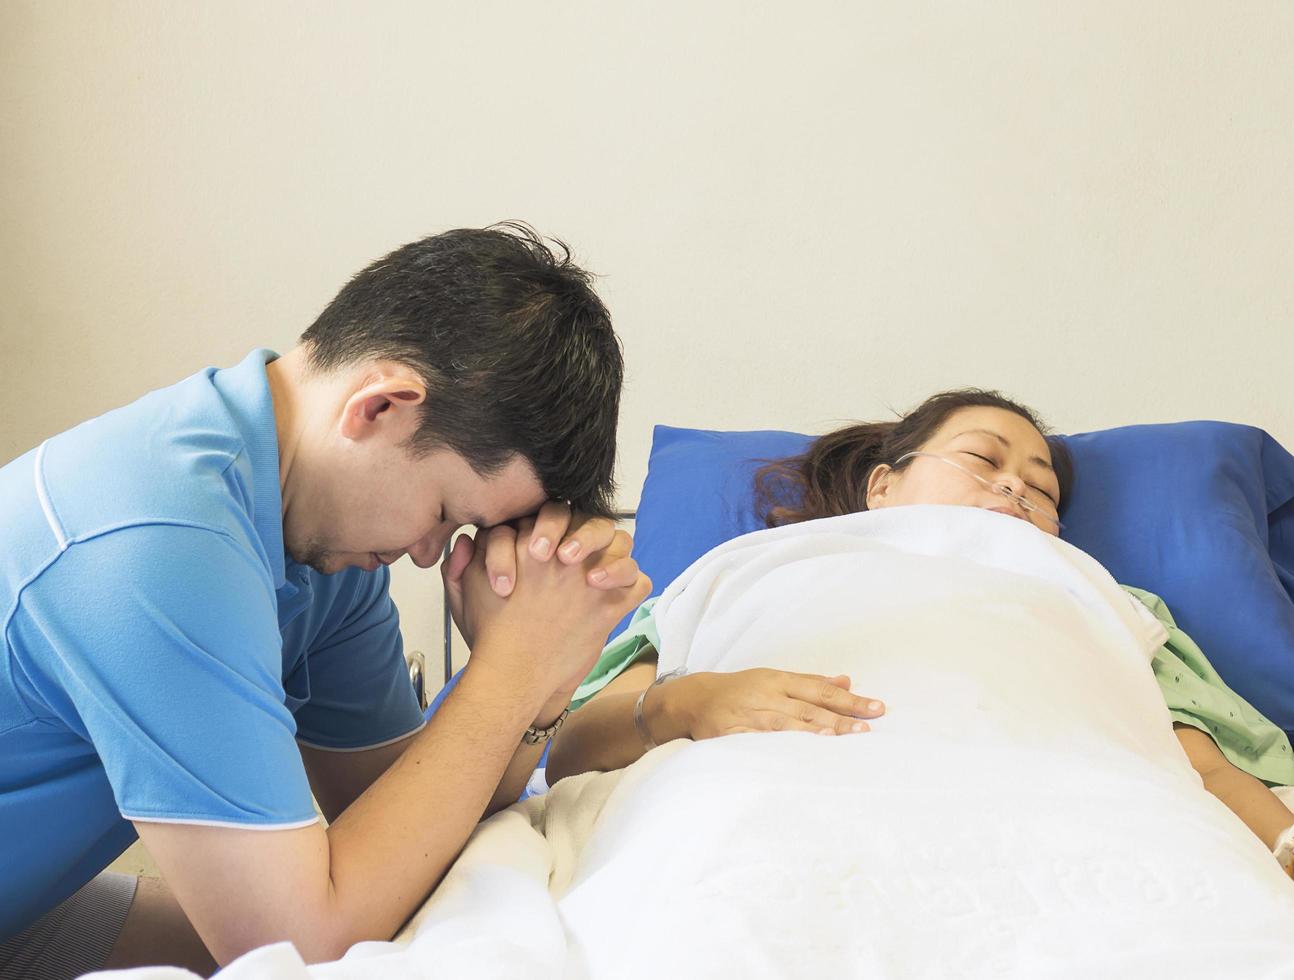 A man is praying for his beloved sick woman to get well soon in the hospital photo